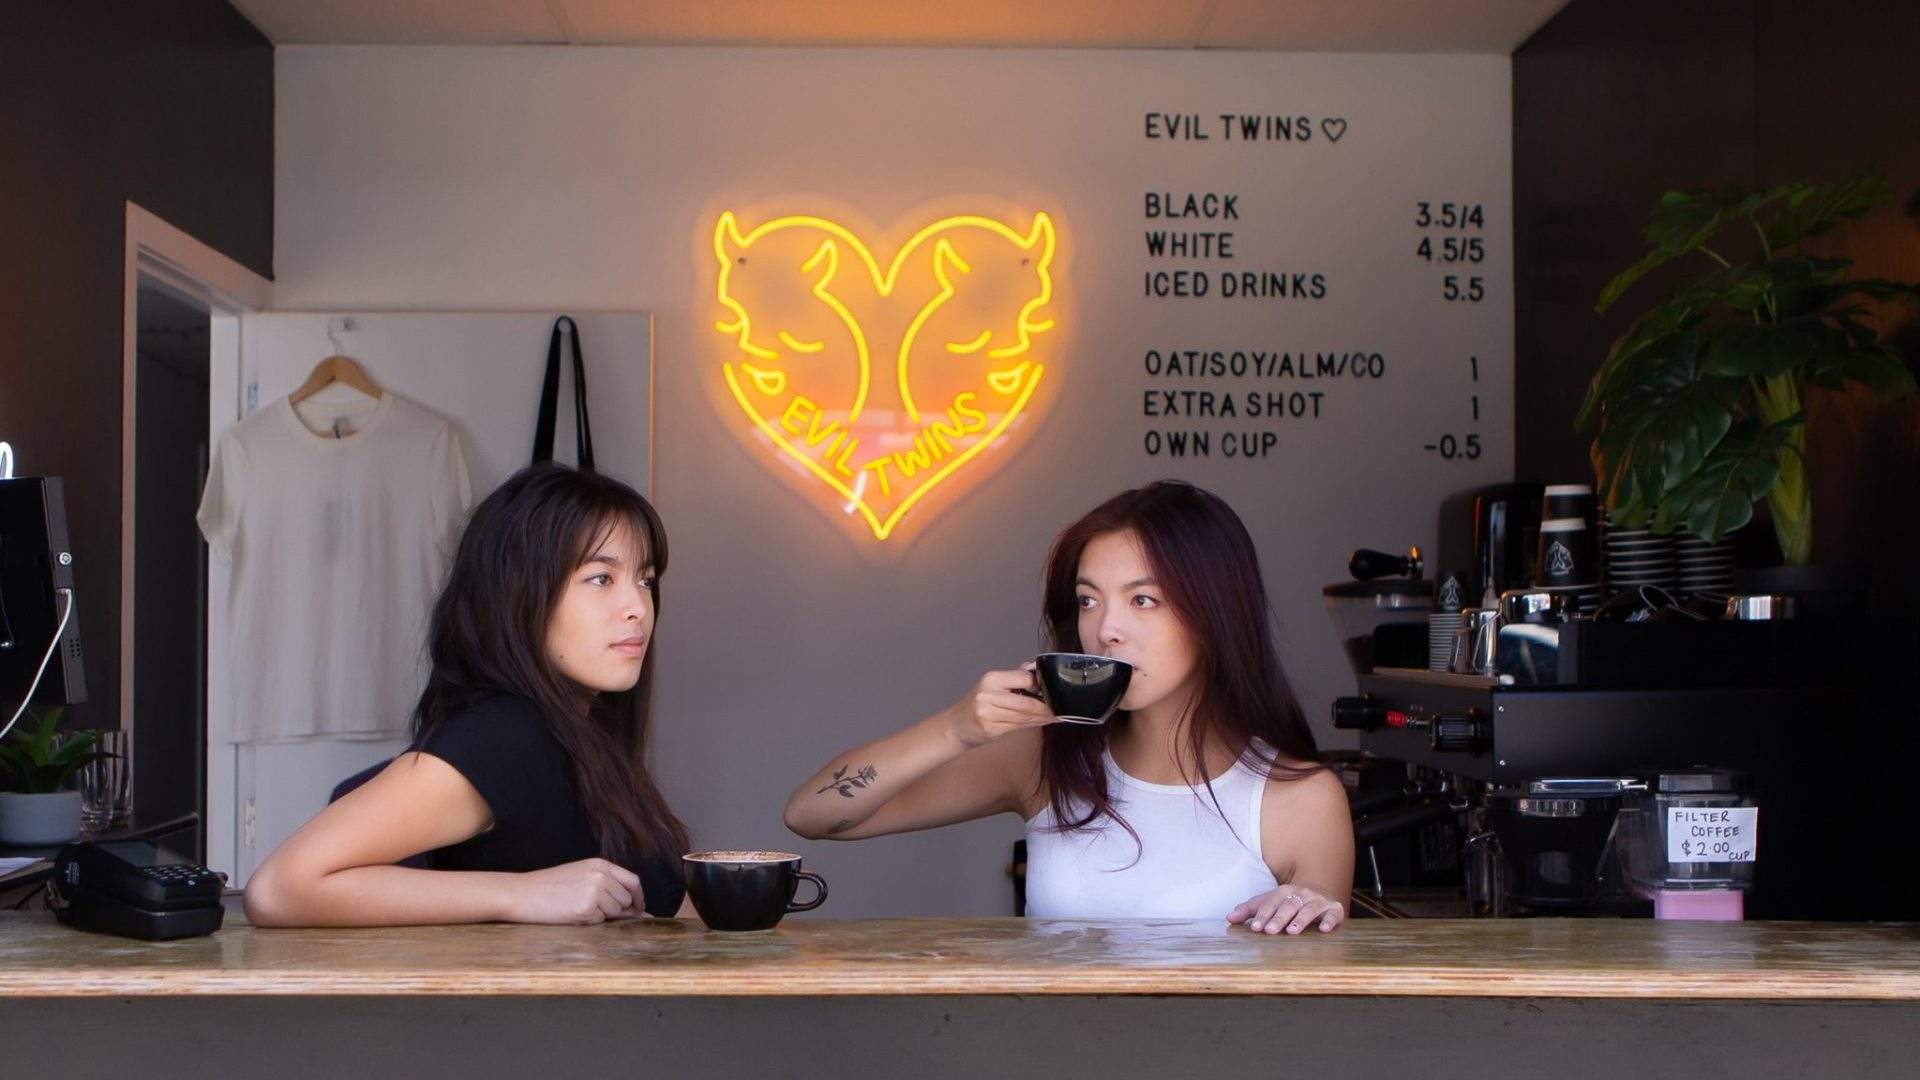 Evil Twins Is a New Hole-in-the-Wall Coffee Spot on Vivian Street